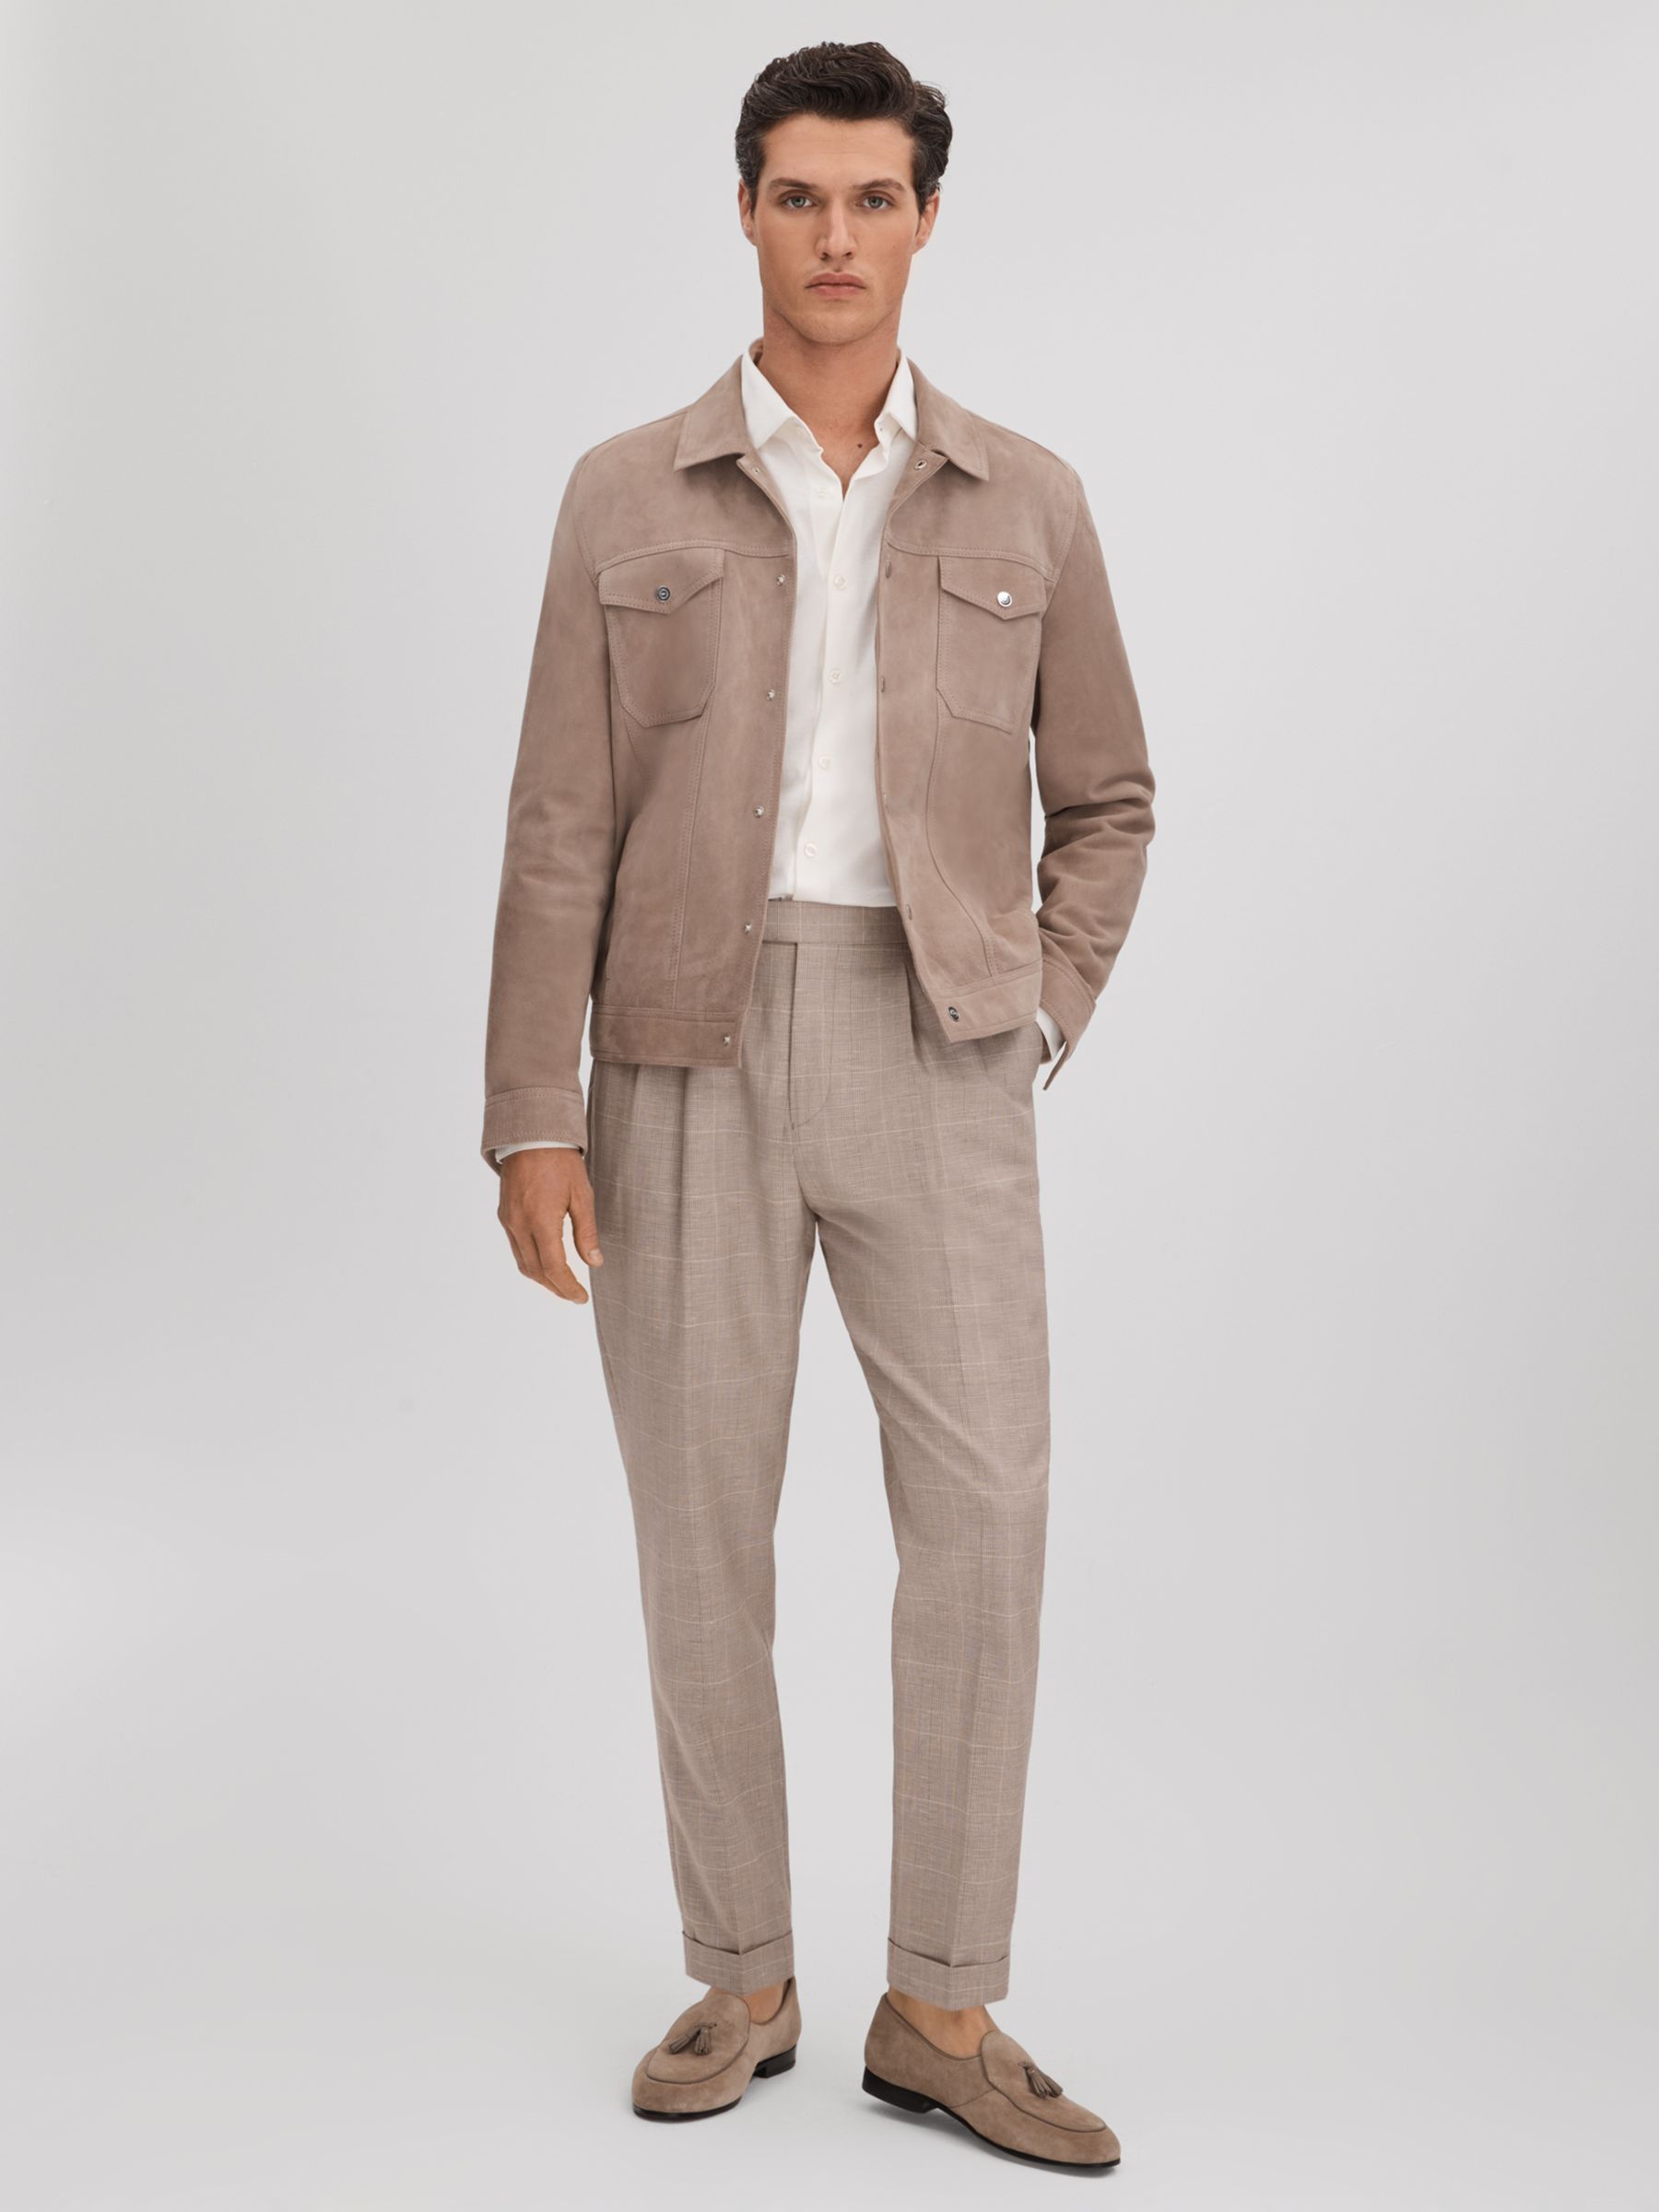 Reiss Collect Hopsack Check Trousers, Oatmeal, 28R